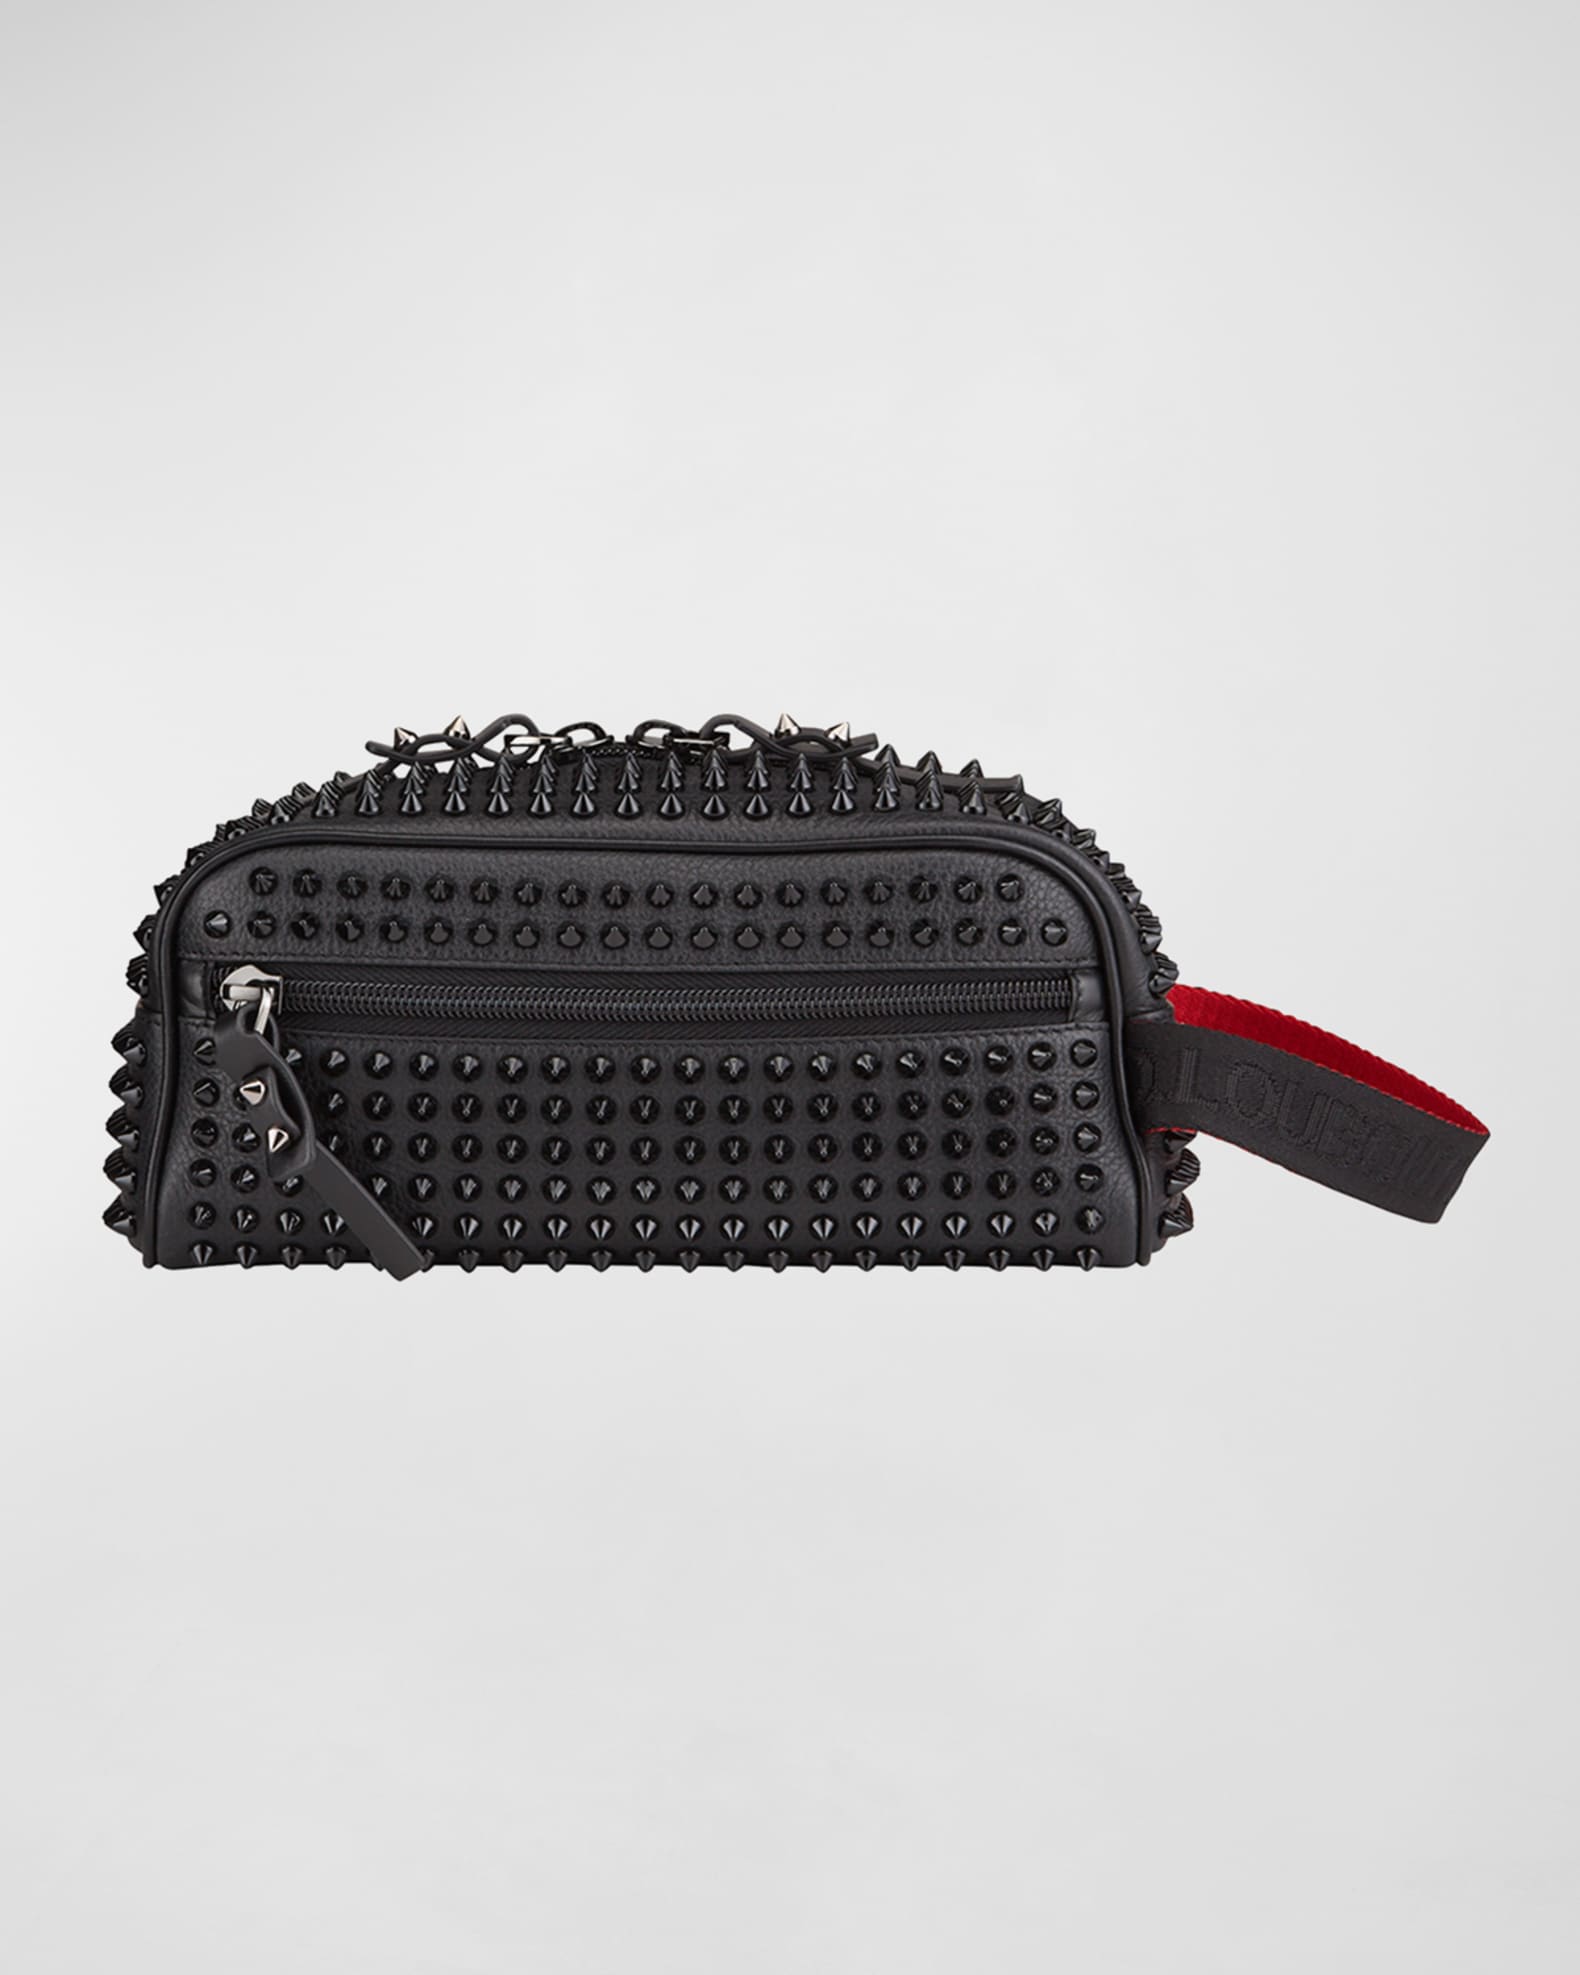 Christian Louboutin Men's Blaster Spiked Leather Travel Toiletry Bag ...